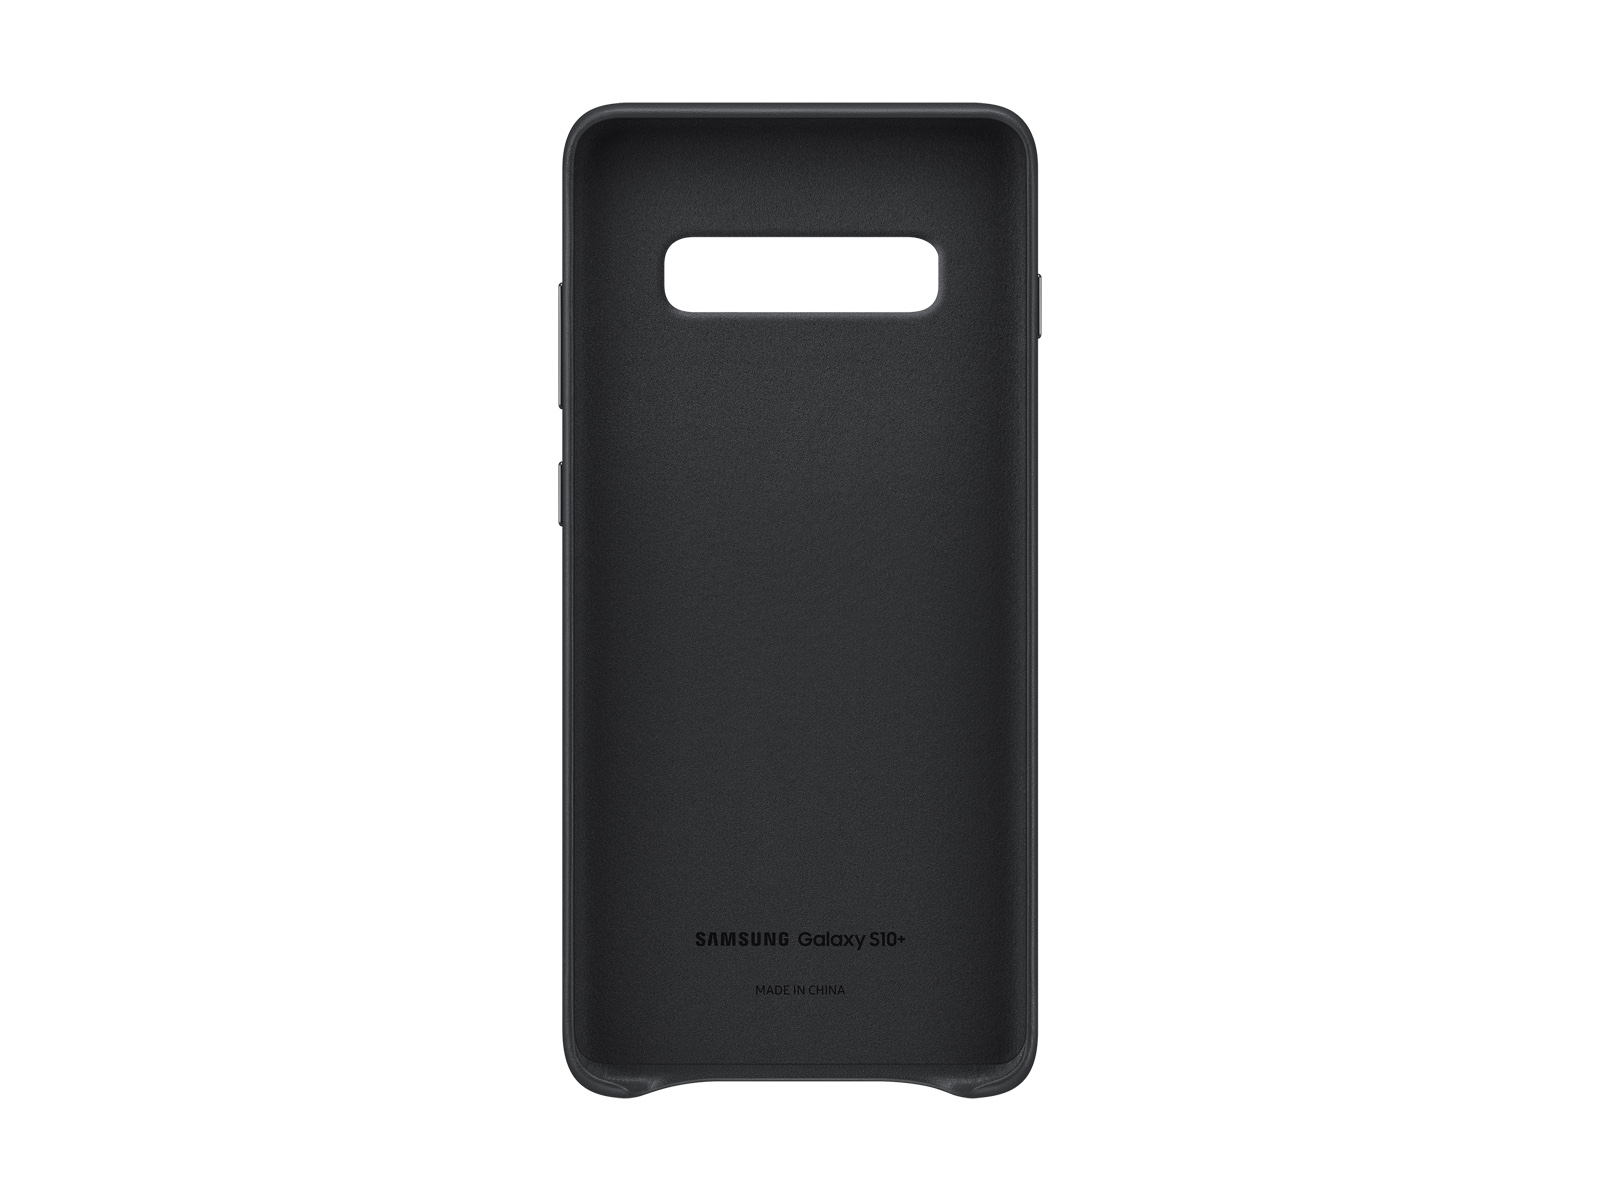 Thumbnail image of Galaxy S10+ Leather Back Cover, Black